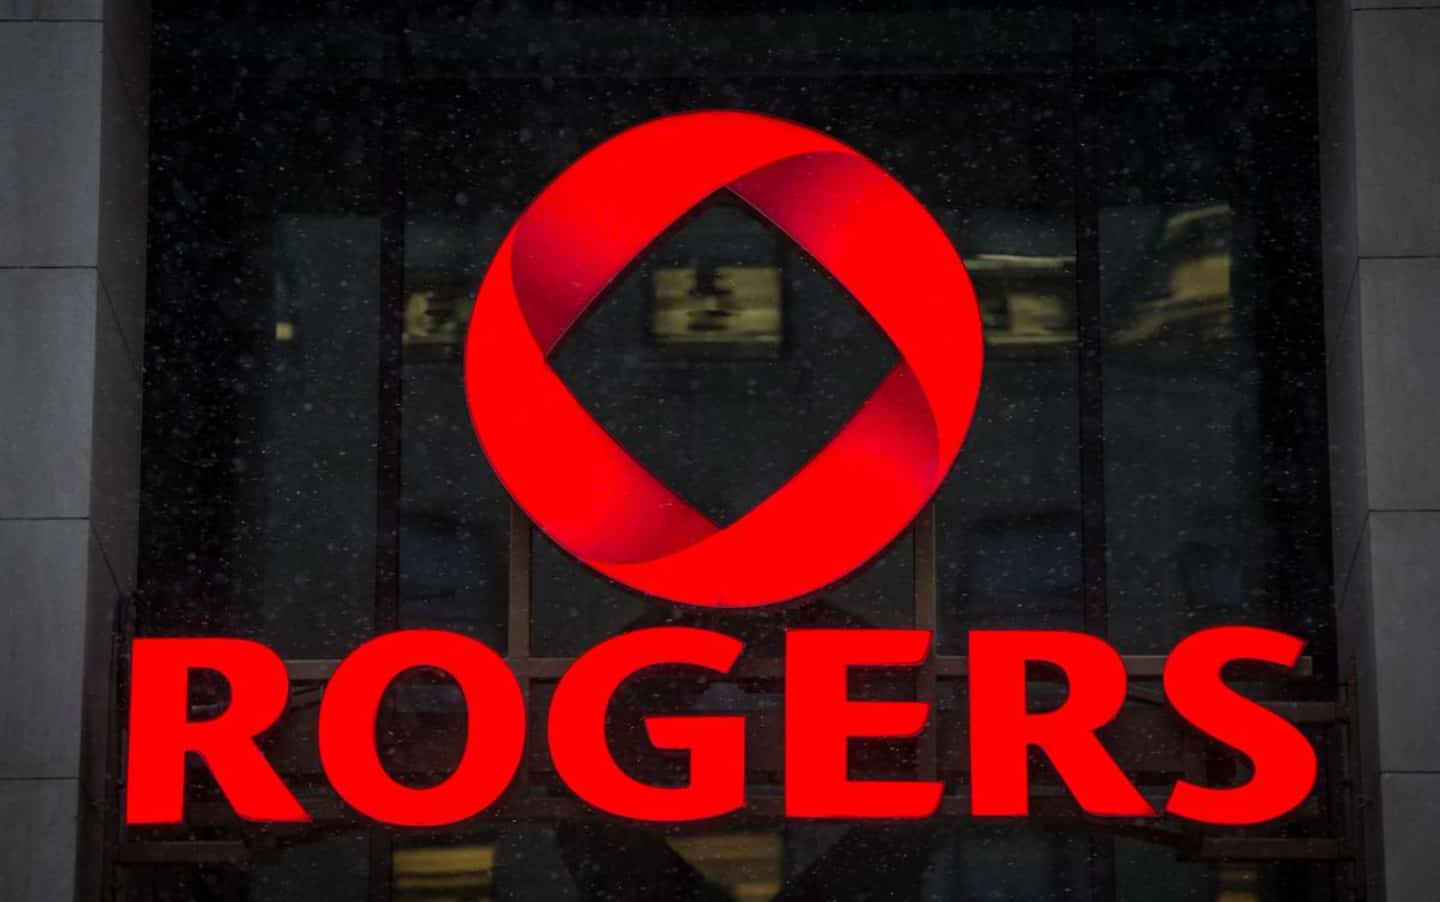 Rogers gives the origin of the breakdown and announces compensation